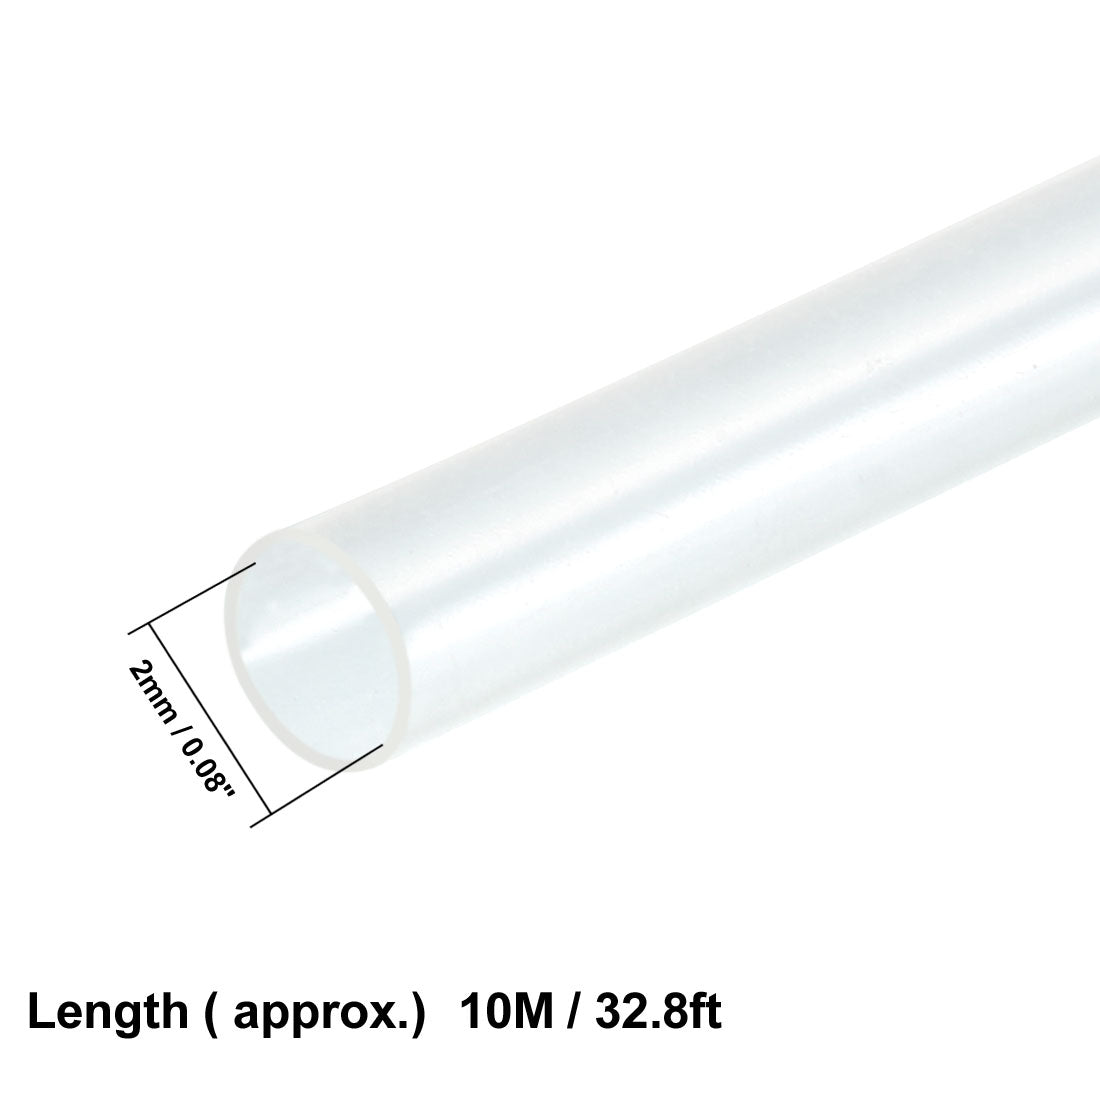 uxcell Uxcell Heat Shrink Tube 2:1 Electrical Insulation Tube Wire Cable Tubing Sleeving Wrap Clear 2mm Diameter 10m Long